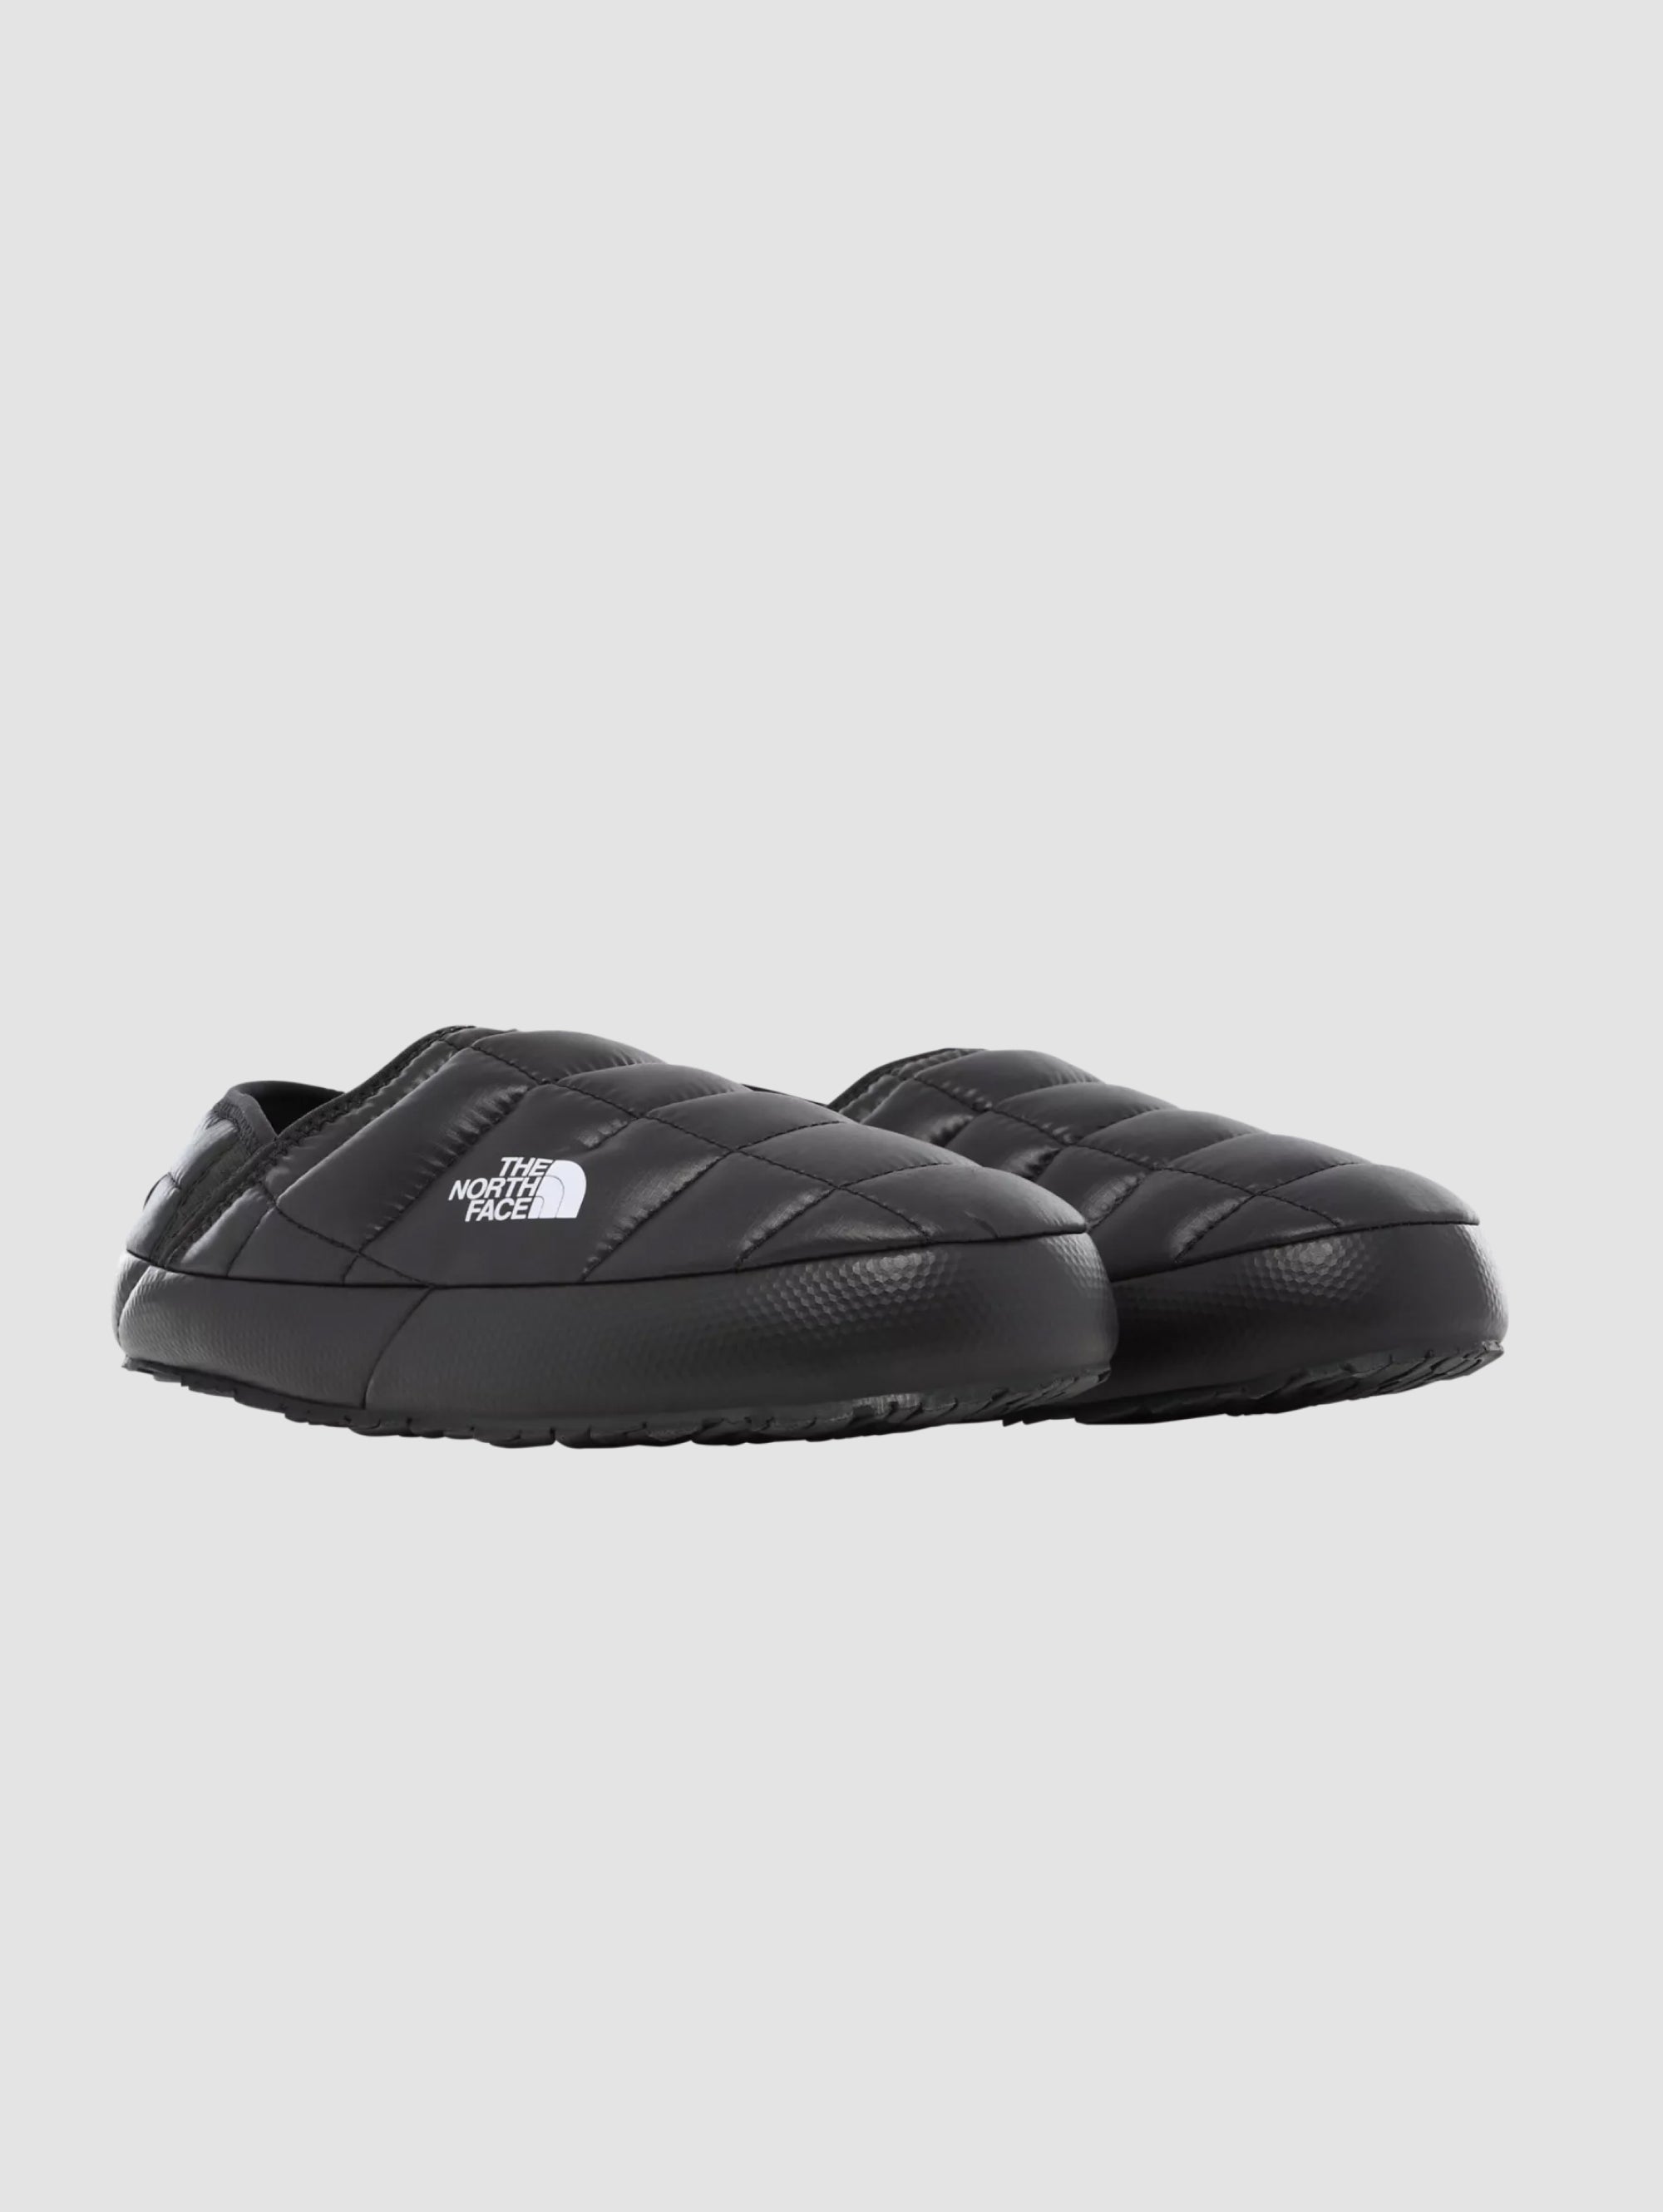 Traction Mule Padded Slippers for Women Black